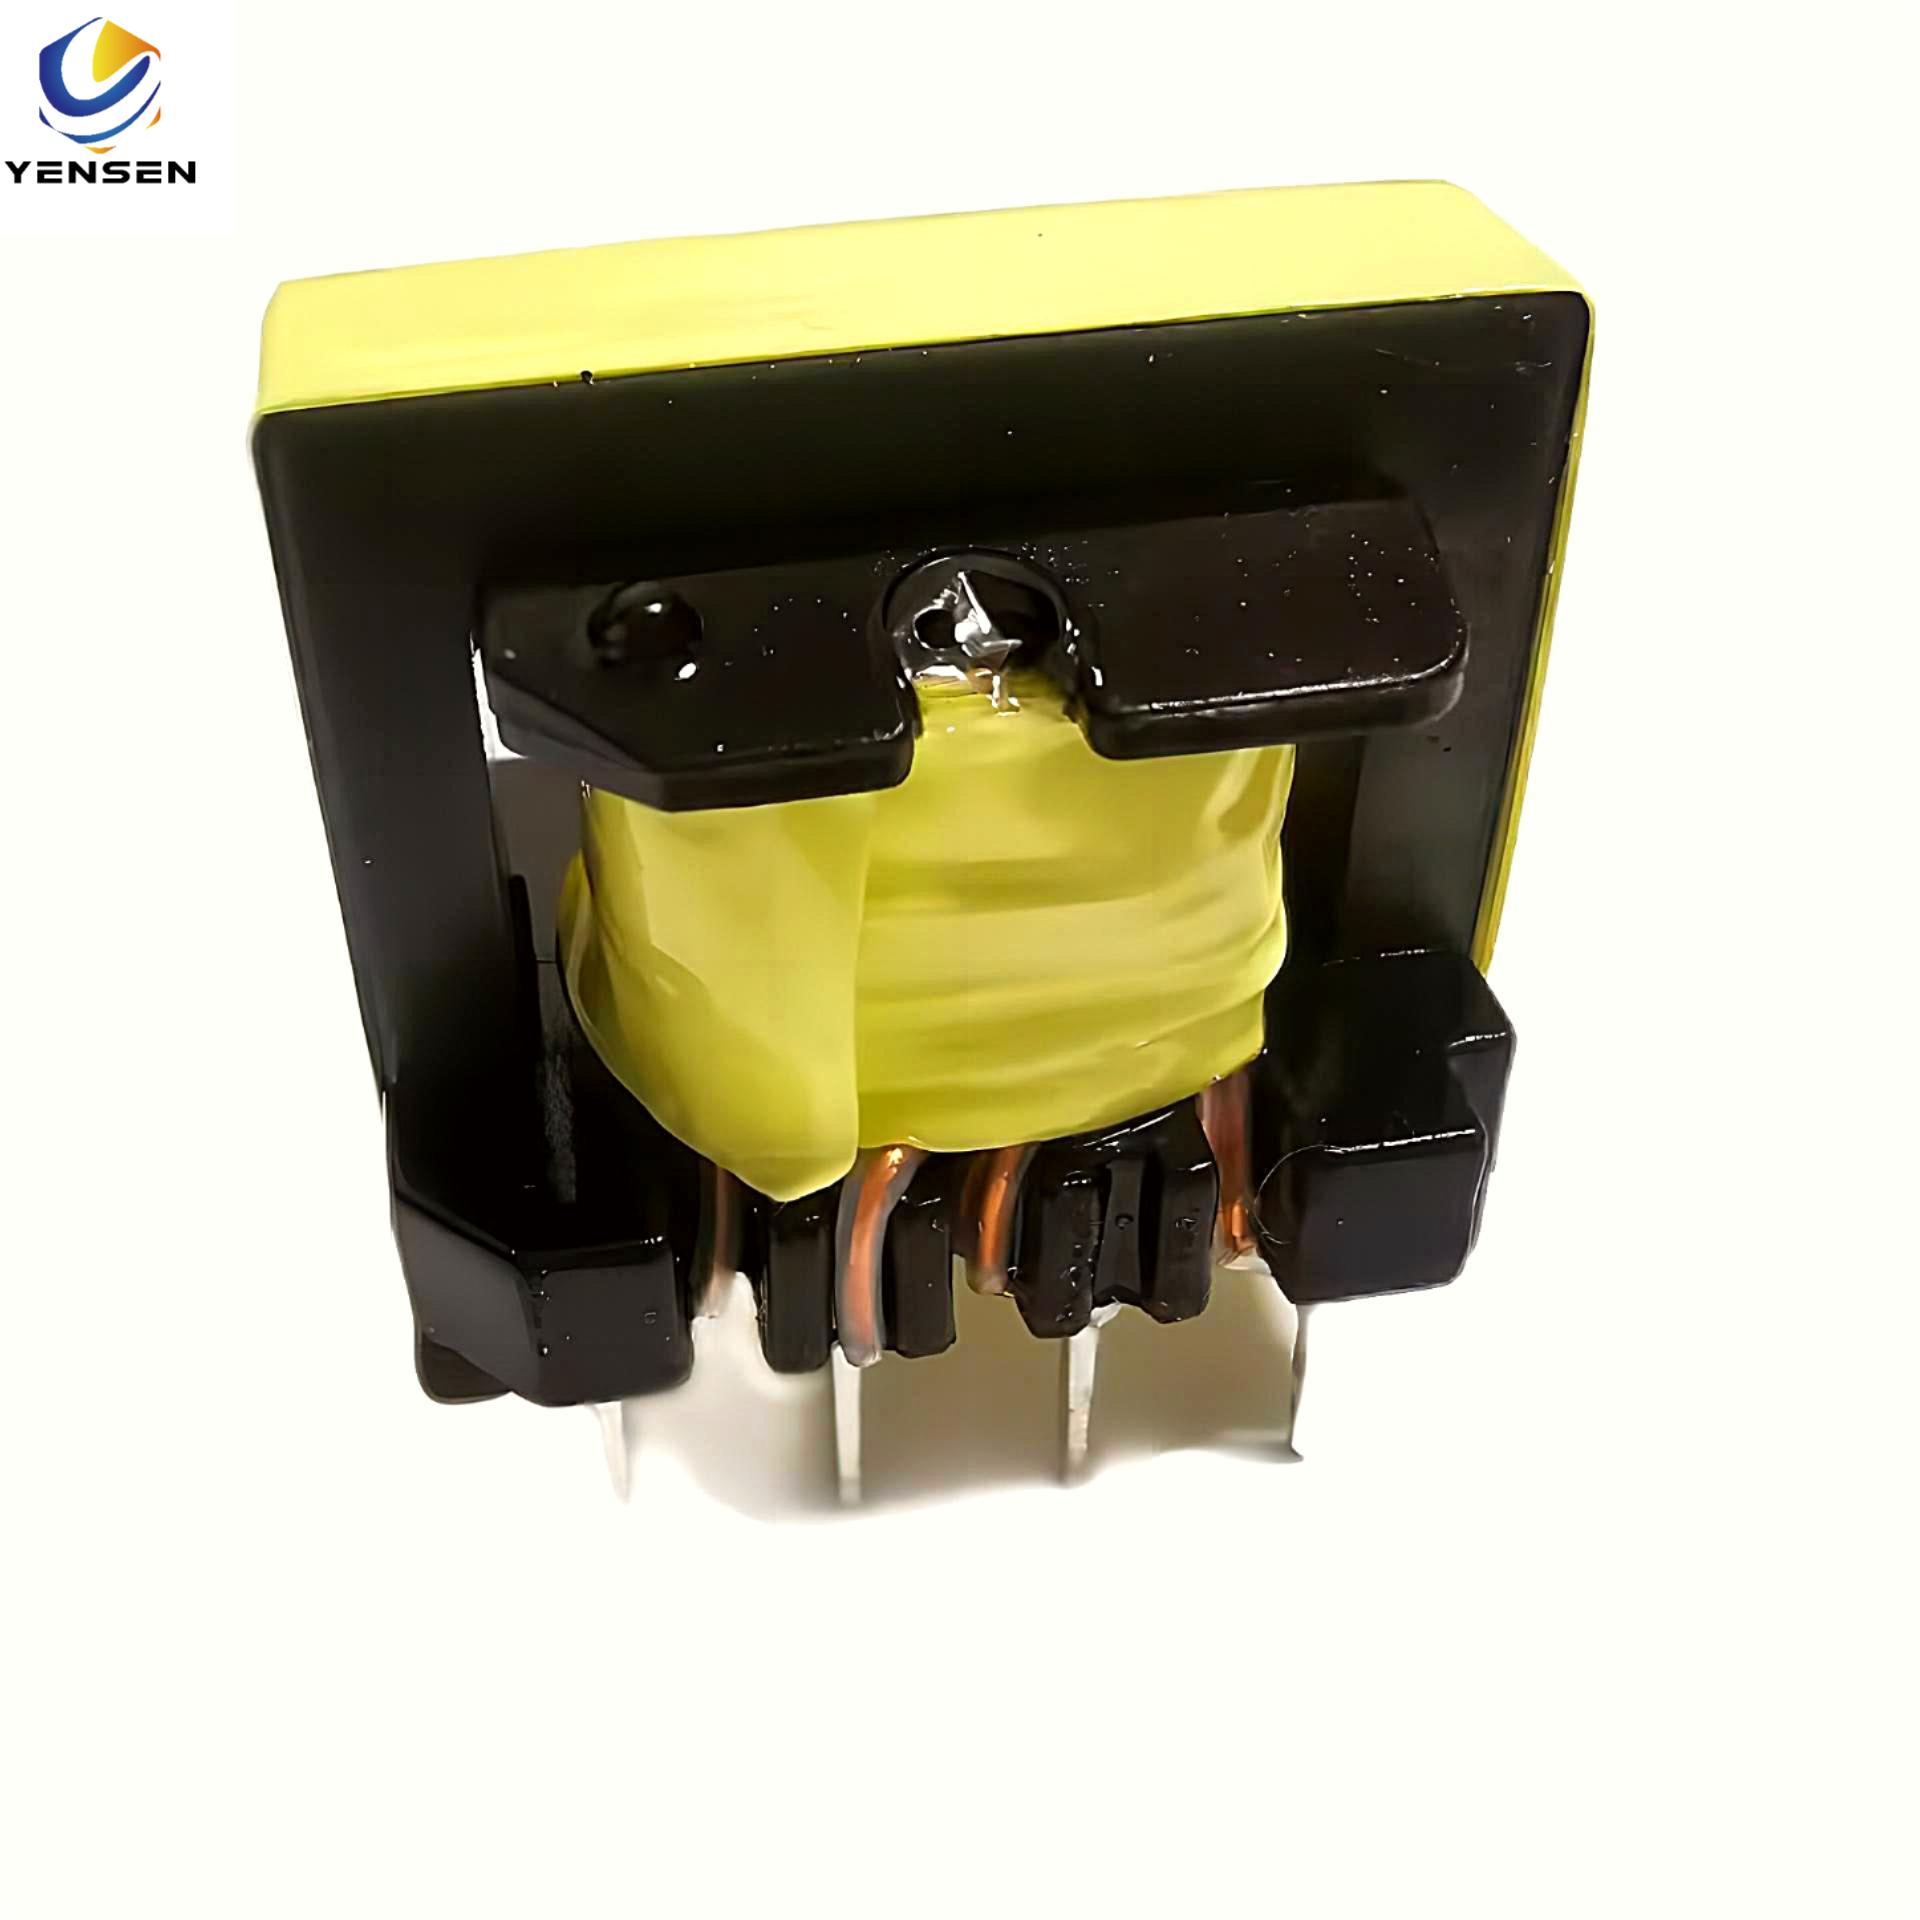 EE25 high frequency switching mode power transformer